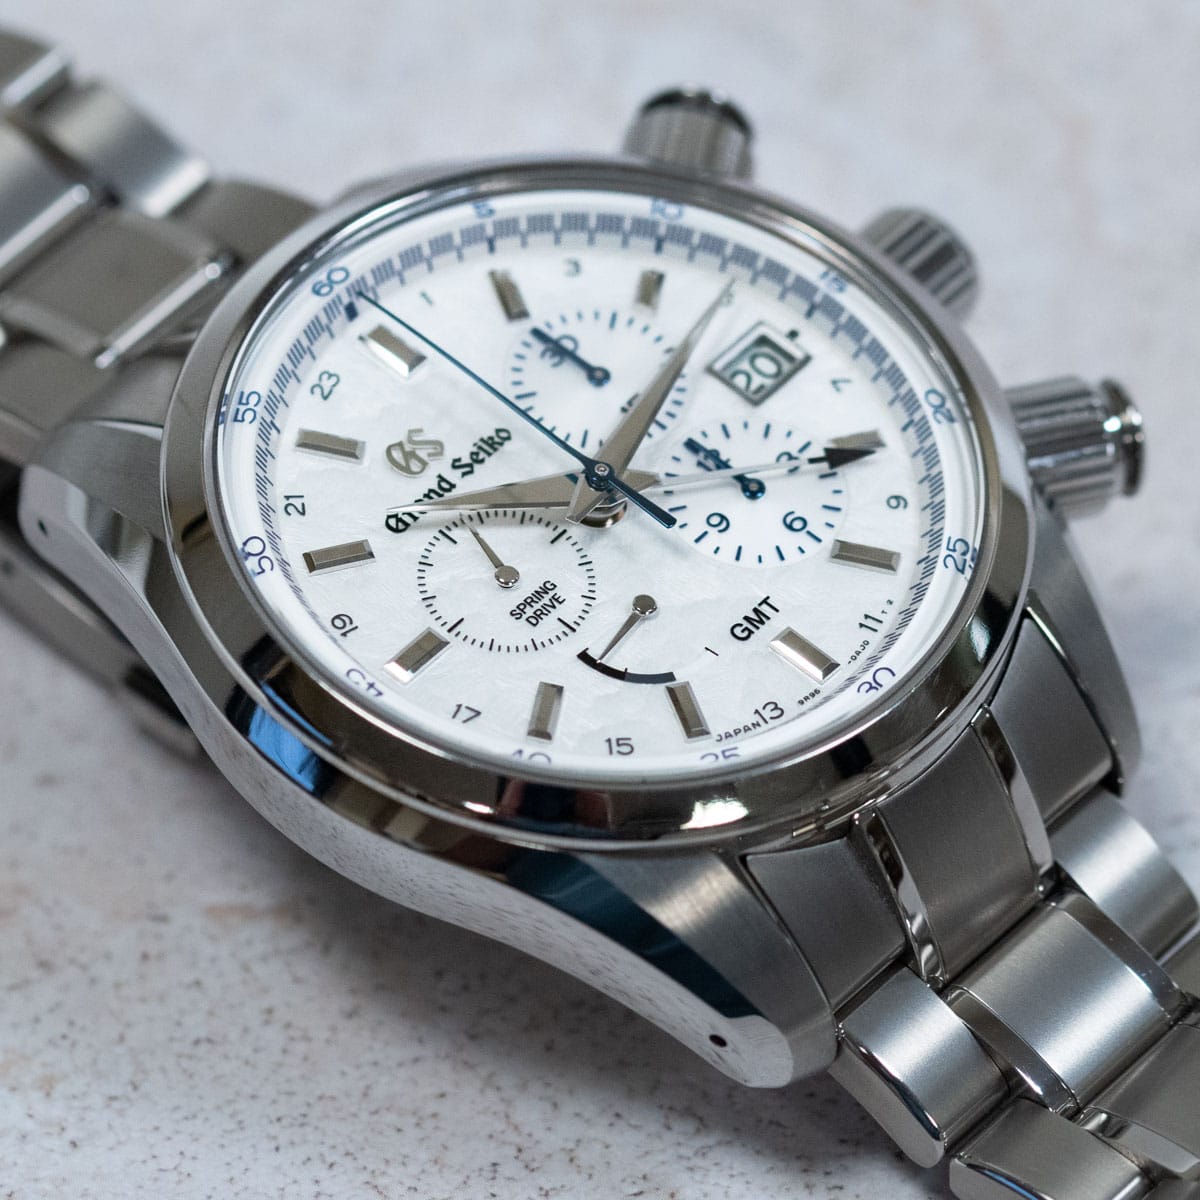 Stylied photo of  of Spring Drive Chronograph GMT '15th Anniversary'